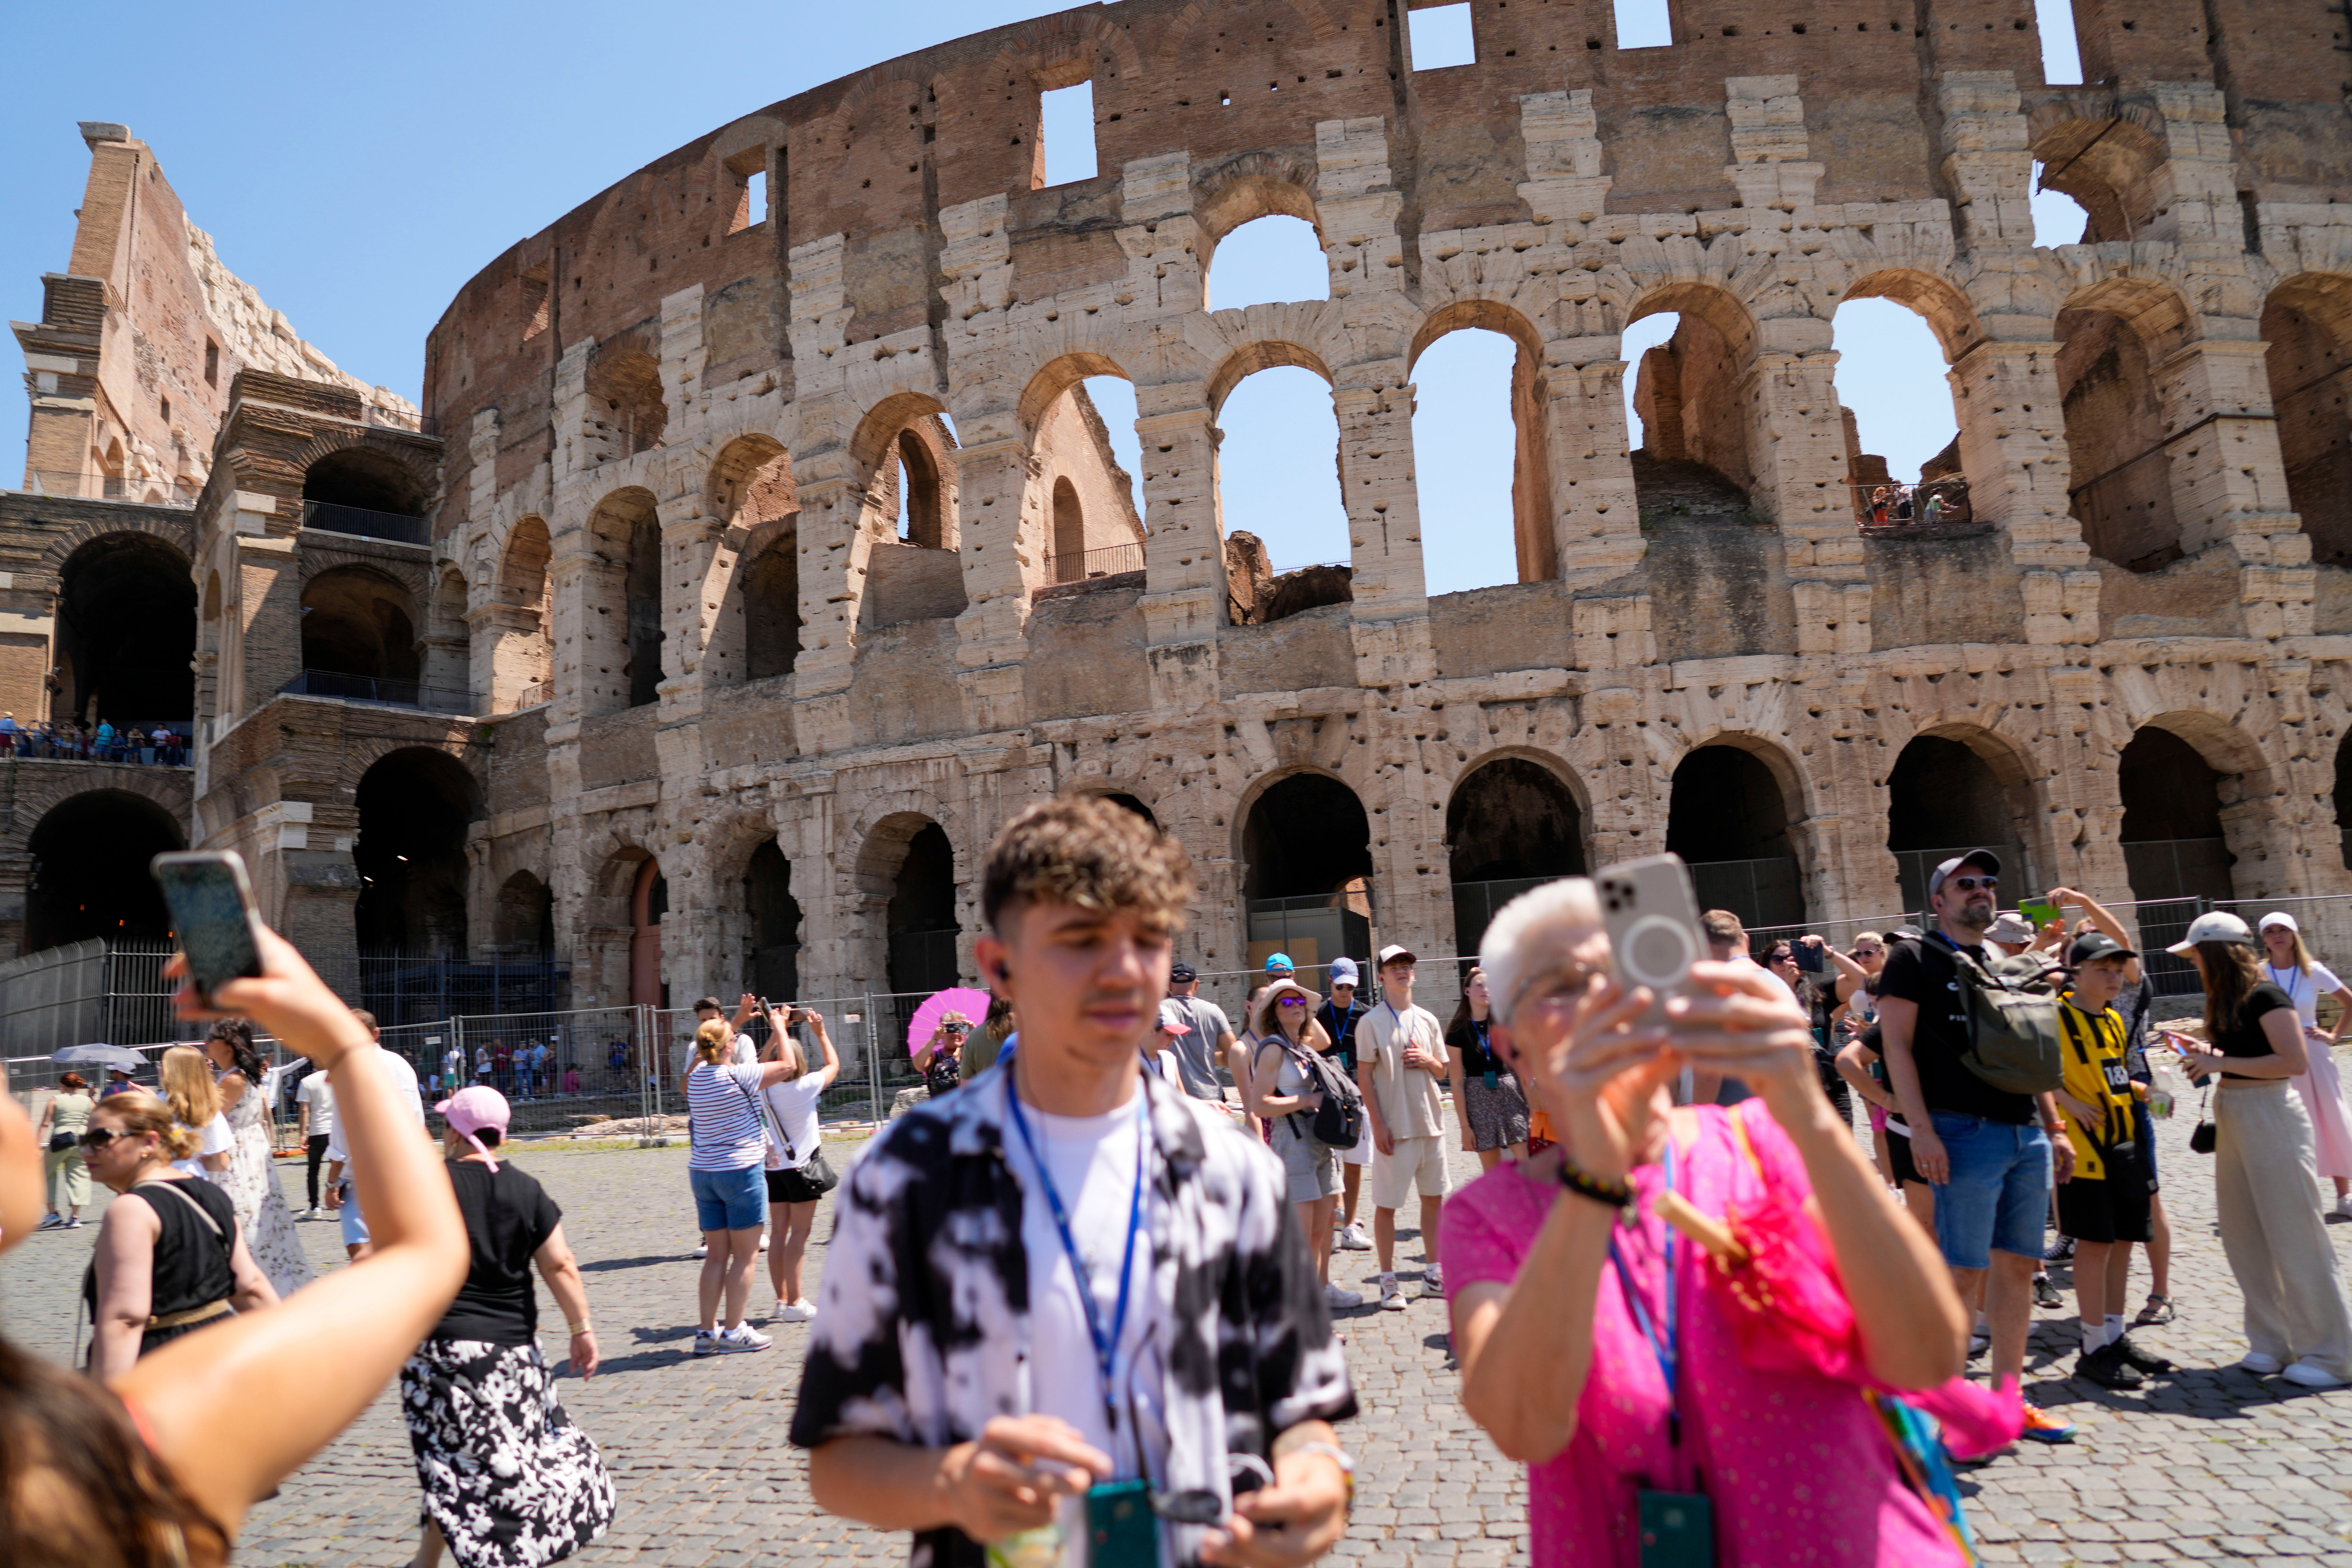 Visitors take photos of the ancient Colosseum in Rome